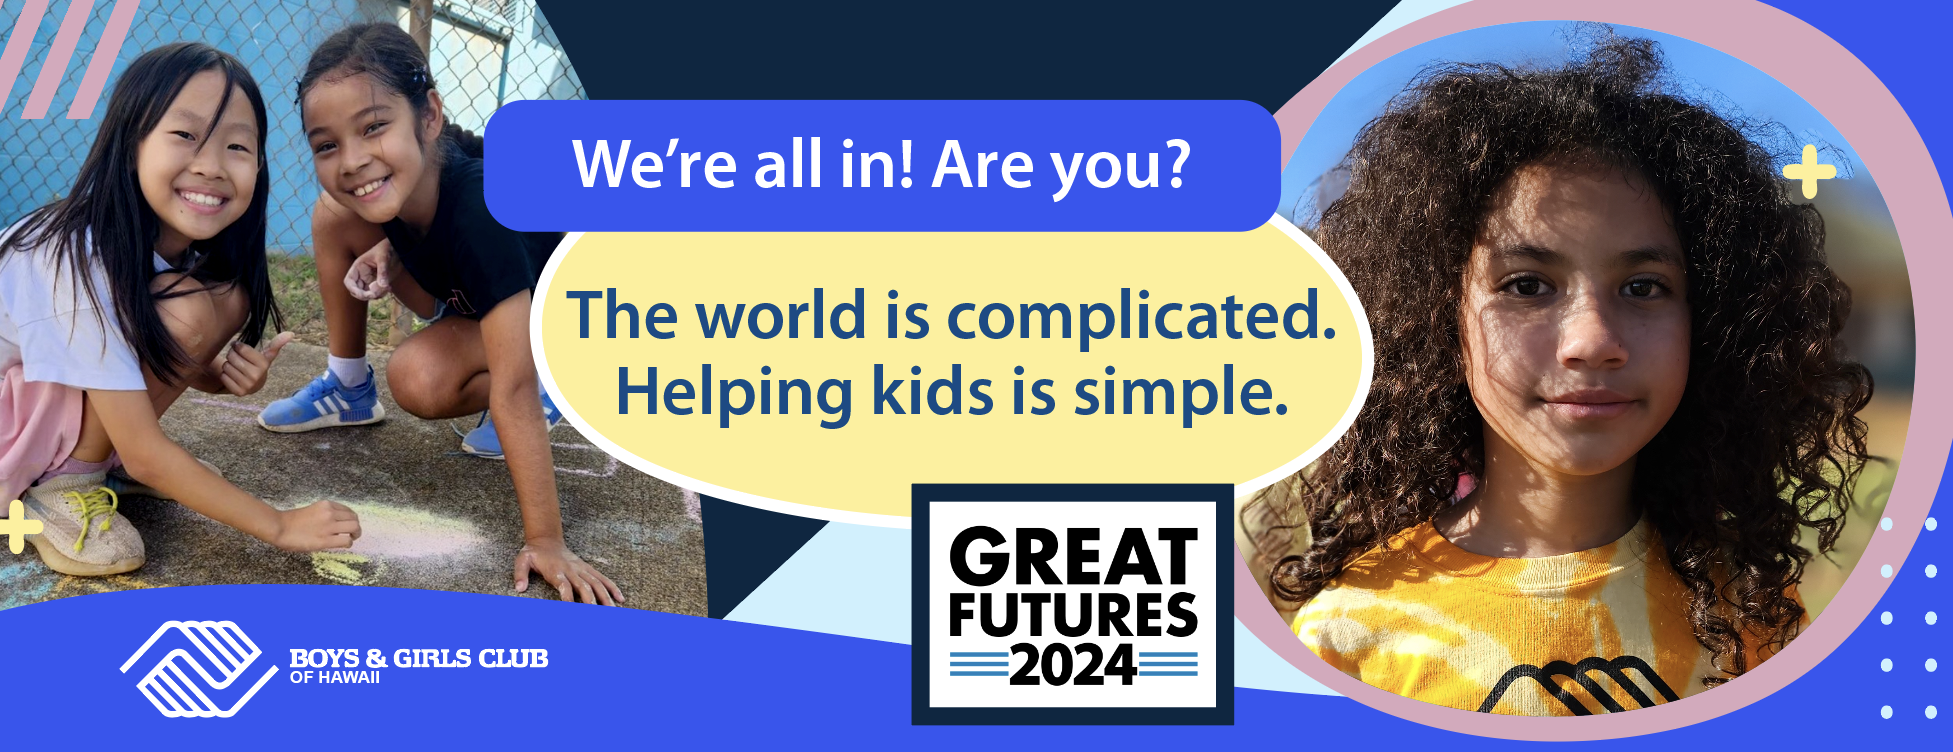 Great Futures 2024